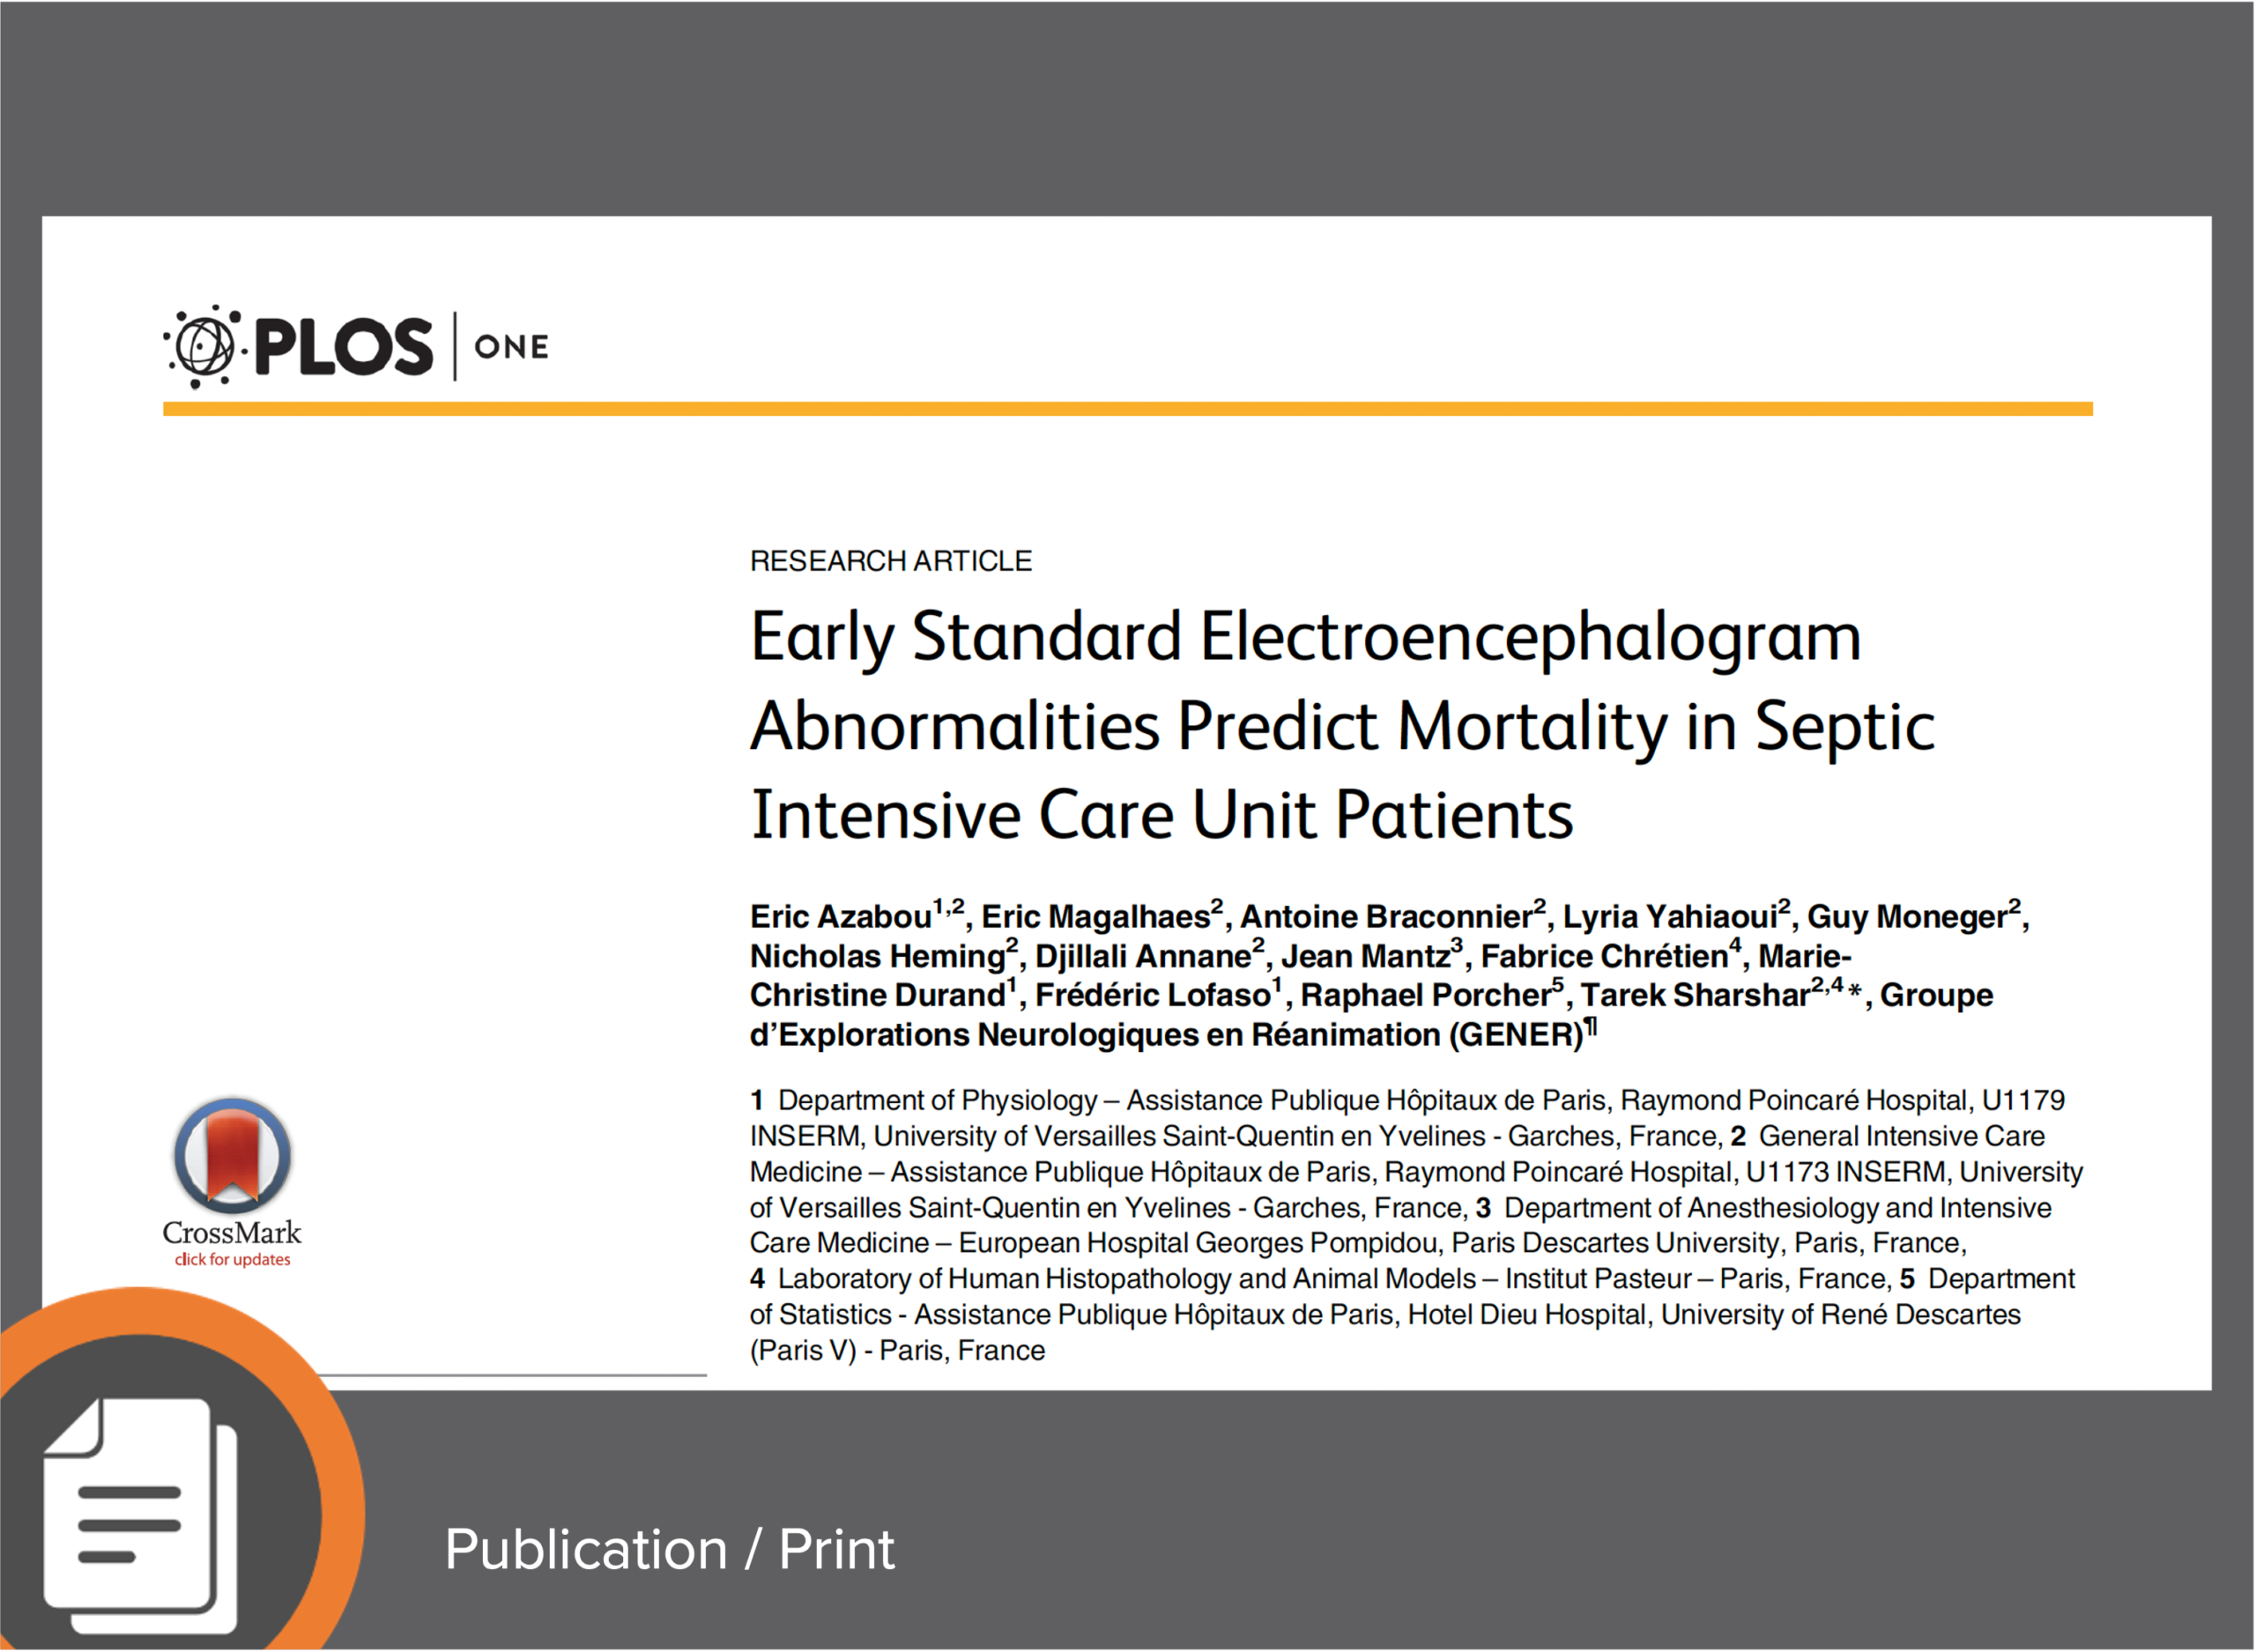 Early Standard Electroencephalogram Abnormalities Predict Mortality in Septic Intensive Care Unit Patients